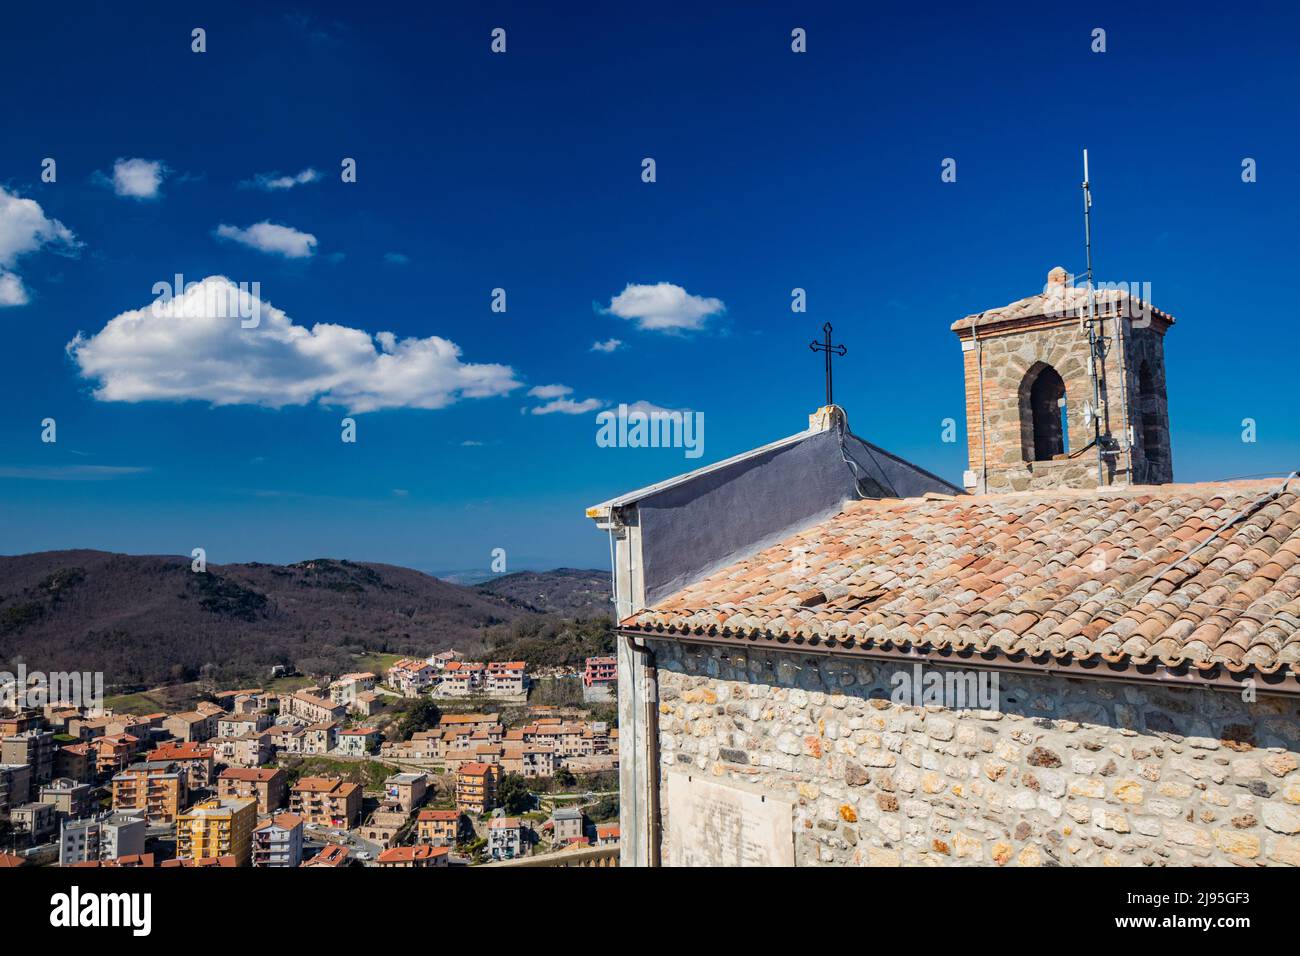 The small village of Tolfa, in Lazio. The Sanctuary of the Madonna della Rocca on top of the cliff. The inhabited center and the roofs of the houses s Stock Photo